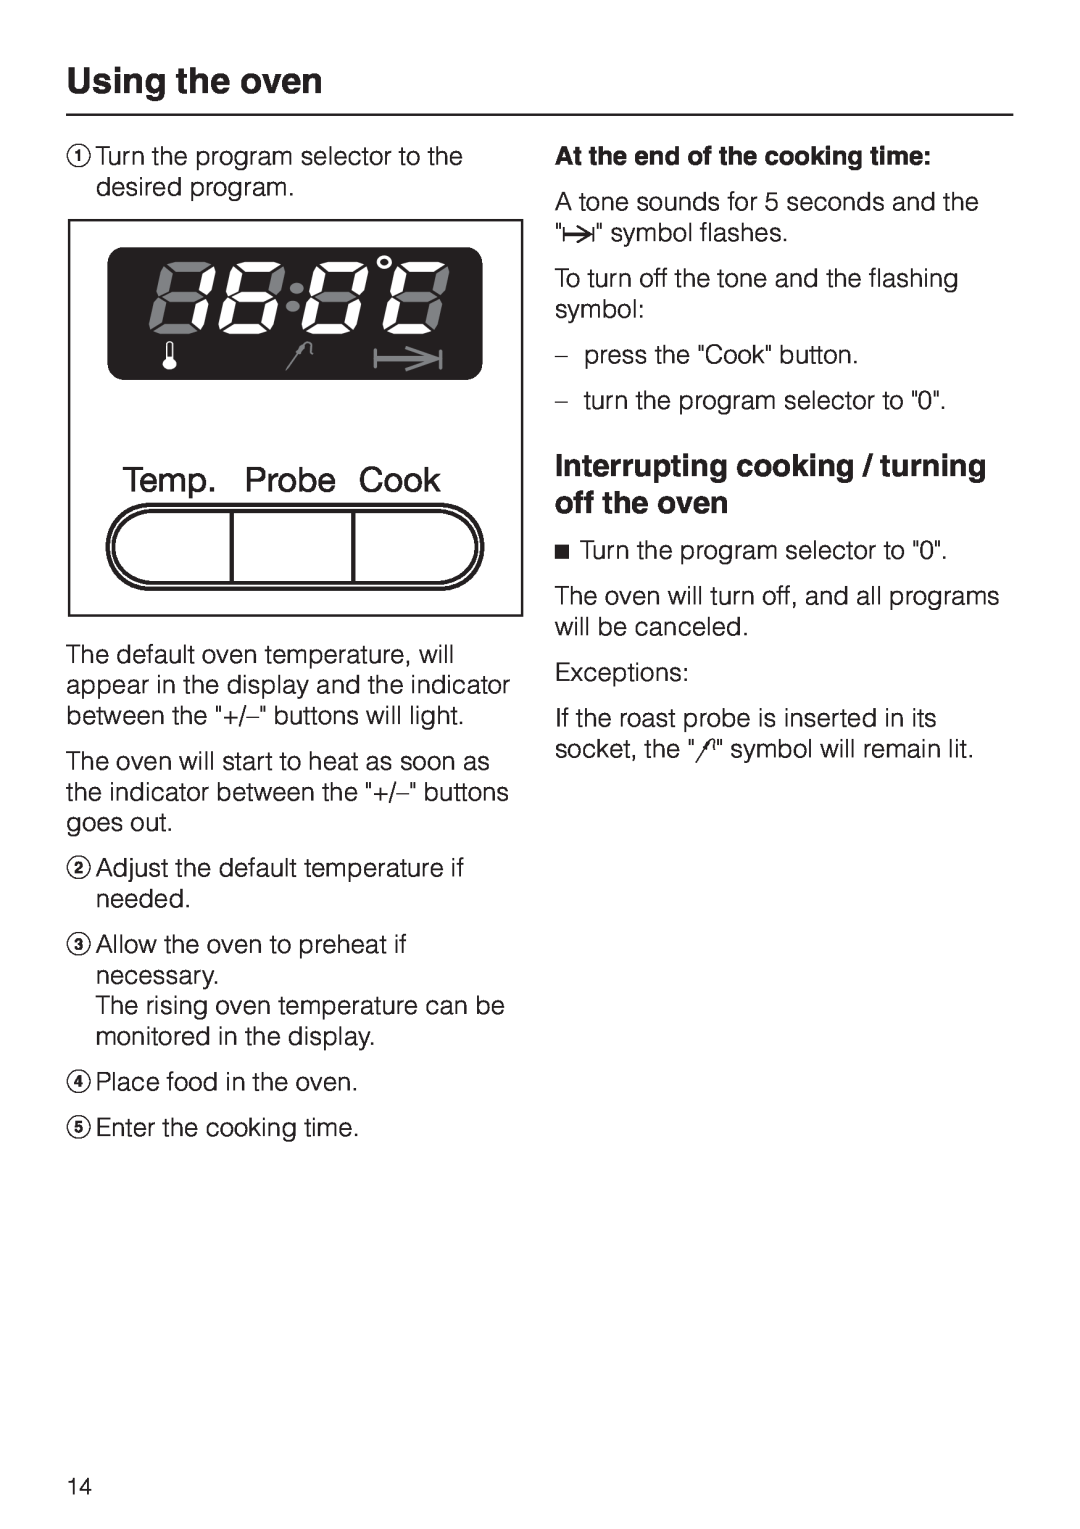 Miele H350-2B operating instructions Using the oven, Interrupting cooking / turning off the oven 